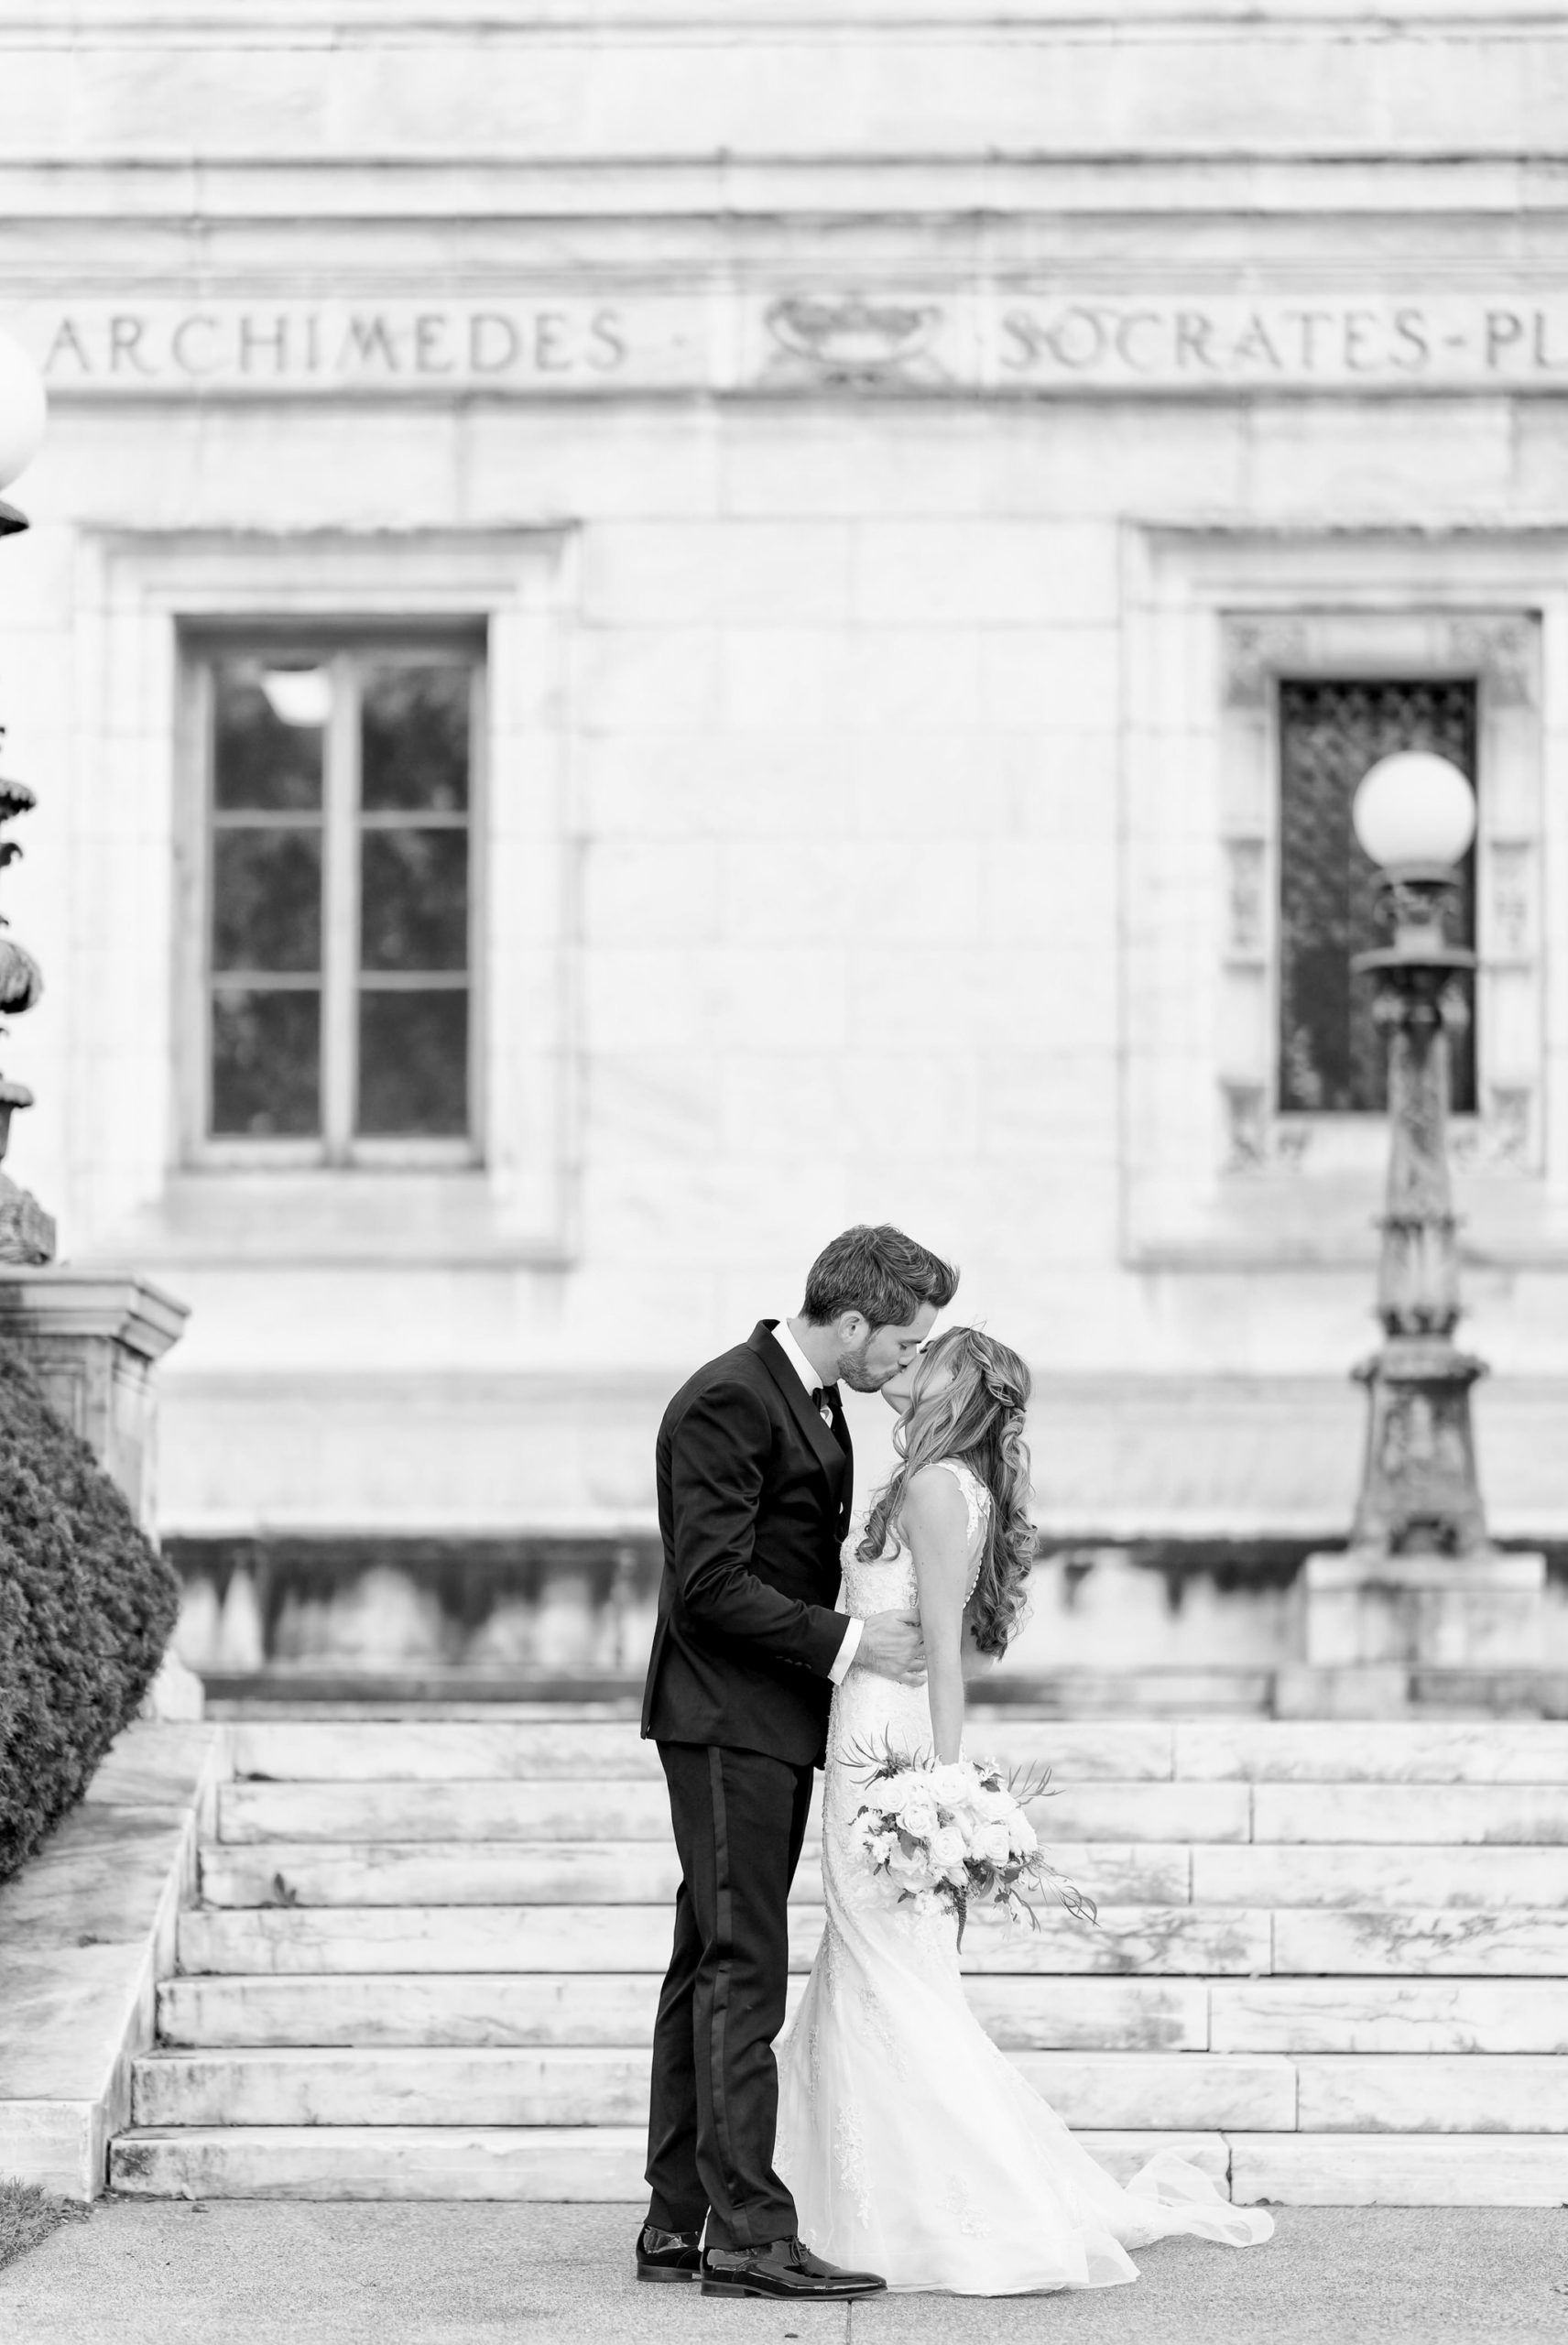 A bride and groom kiss on the stairs of the Detroit Public Library.